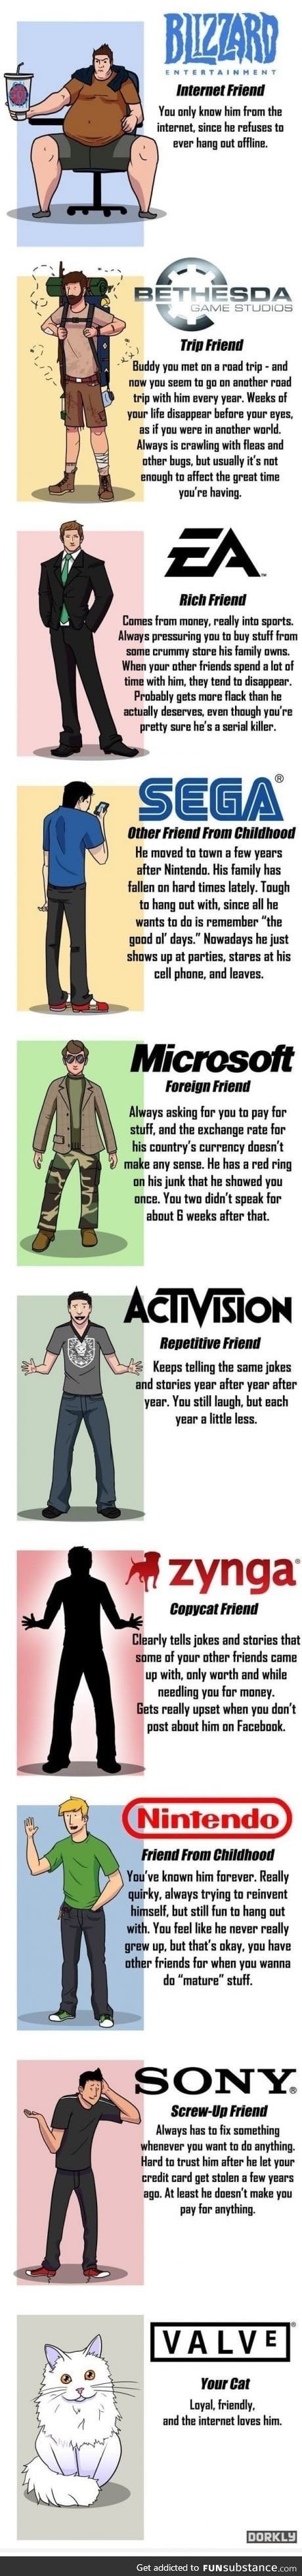 If video game companies were people: